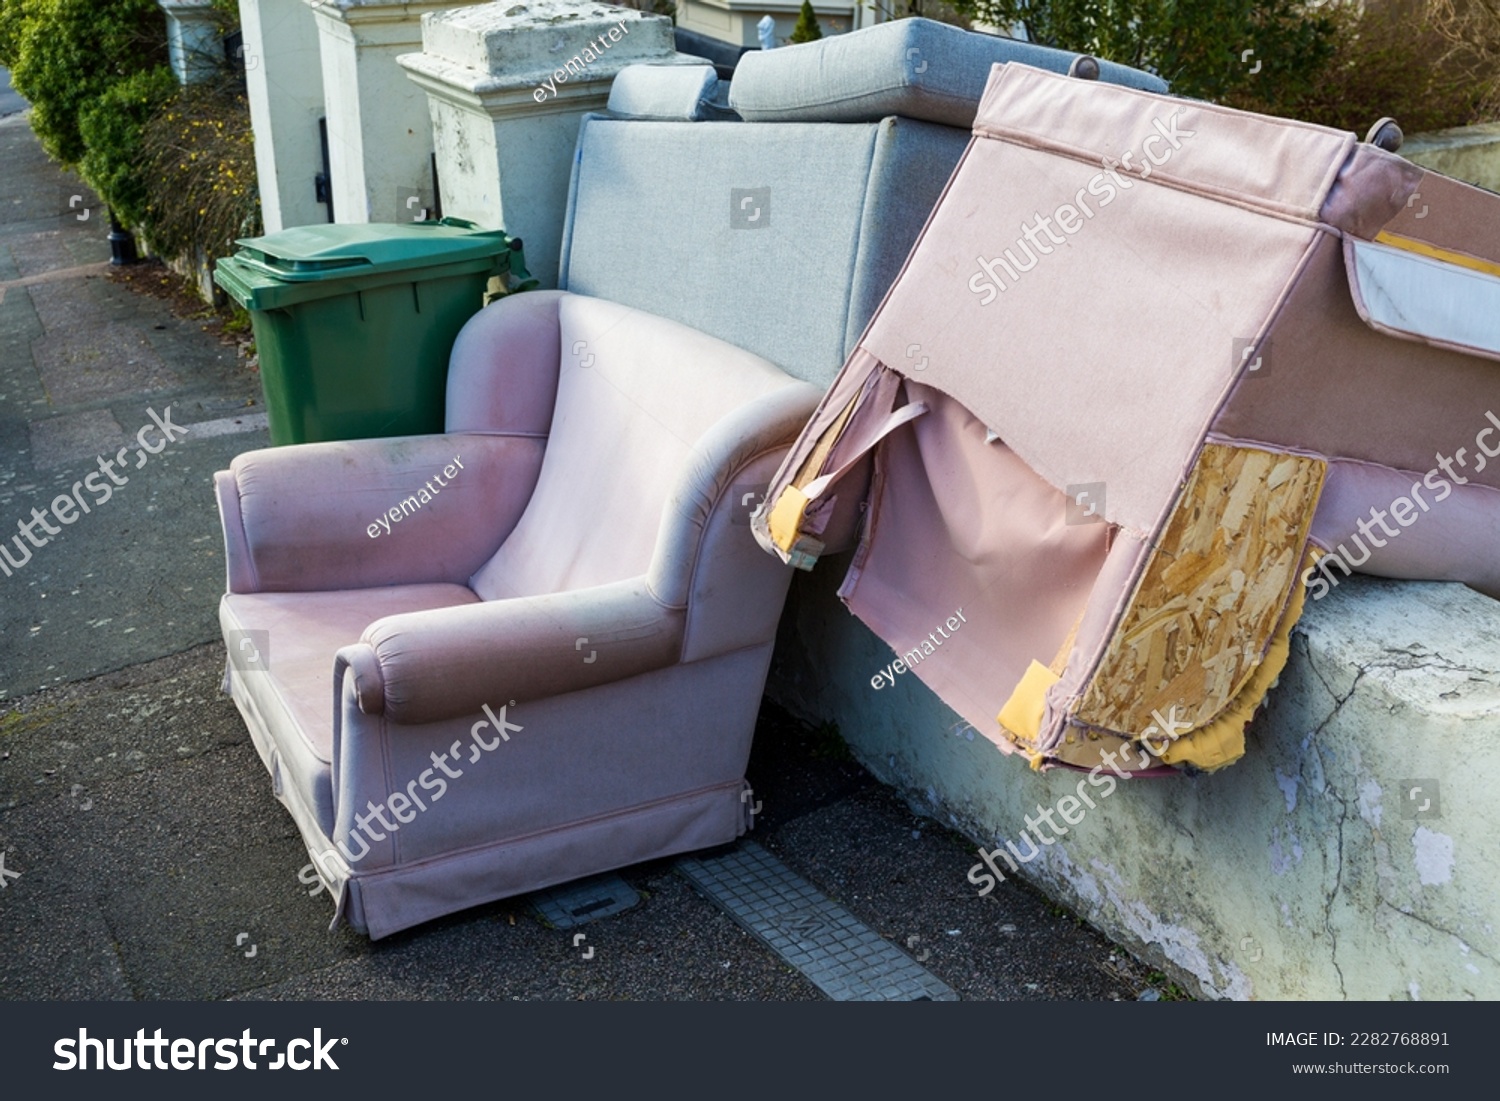 Bulky discarded furniture including armchairs and a settee left outside a house in St Leonards-on-Sea awaiting collection #2282768891